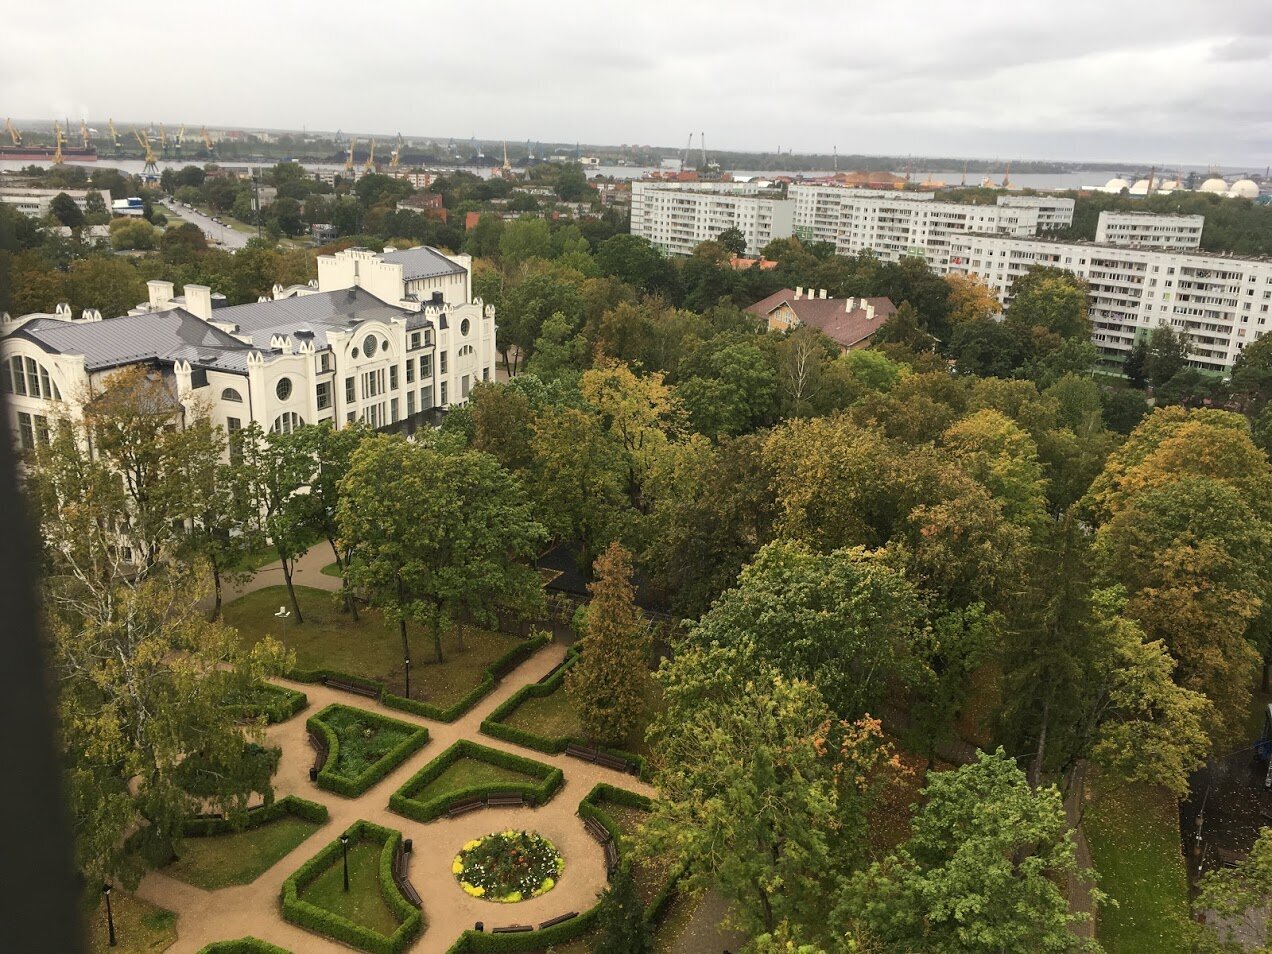 View of the palace, residential area and the Freeport of Riga from the observation tower of Ziemelblazma Park